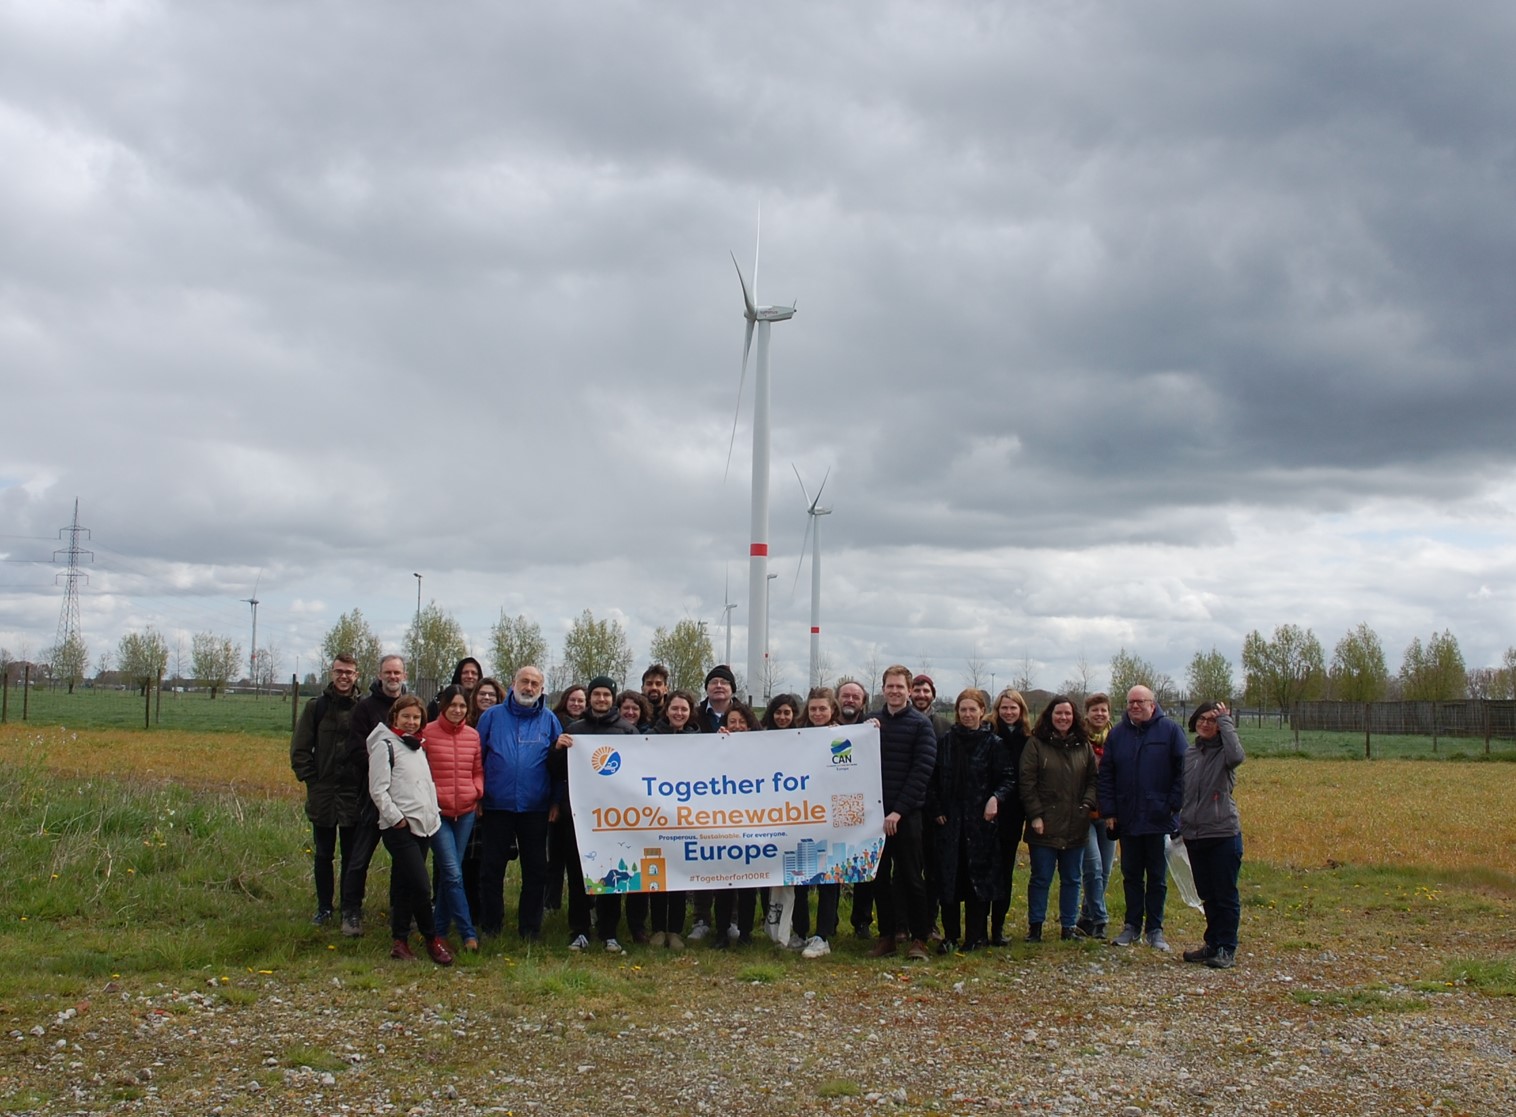 Group photo at the Ecopower windfarm